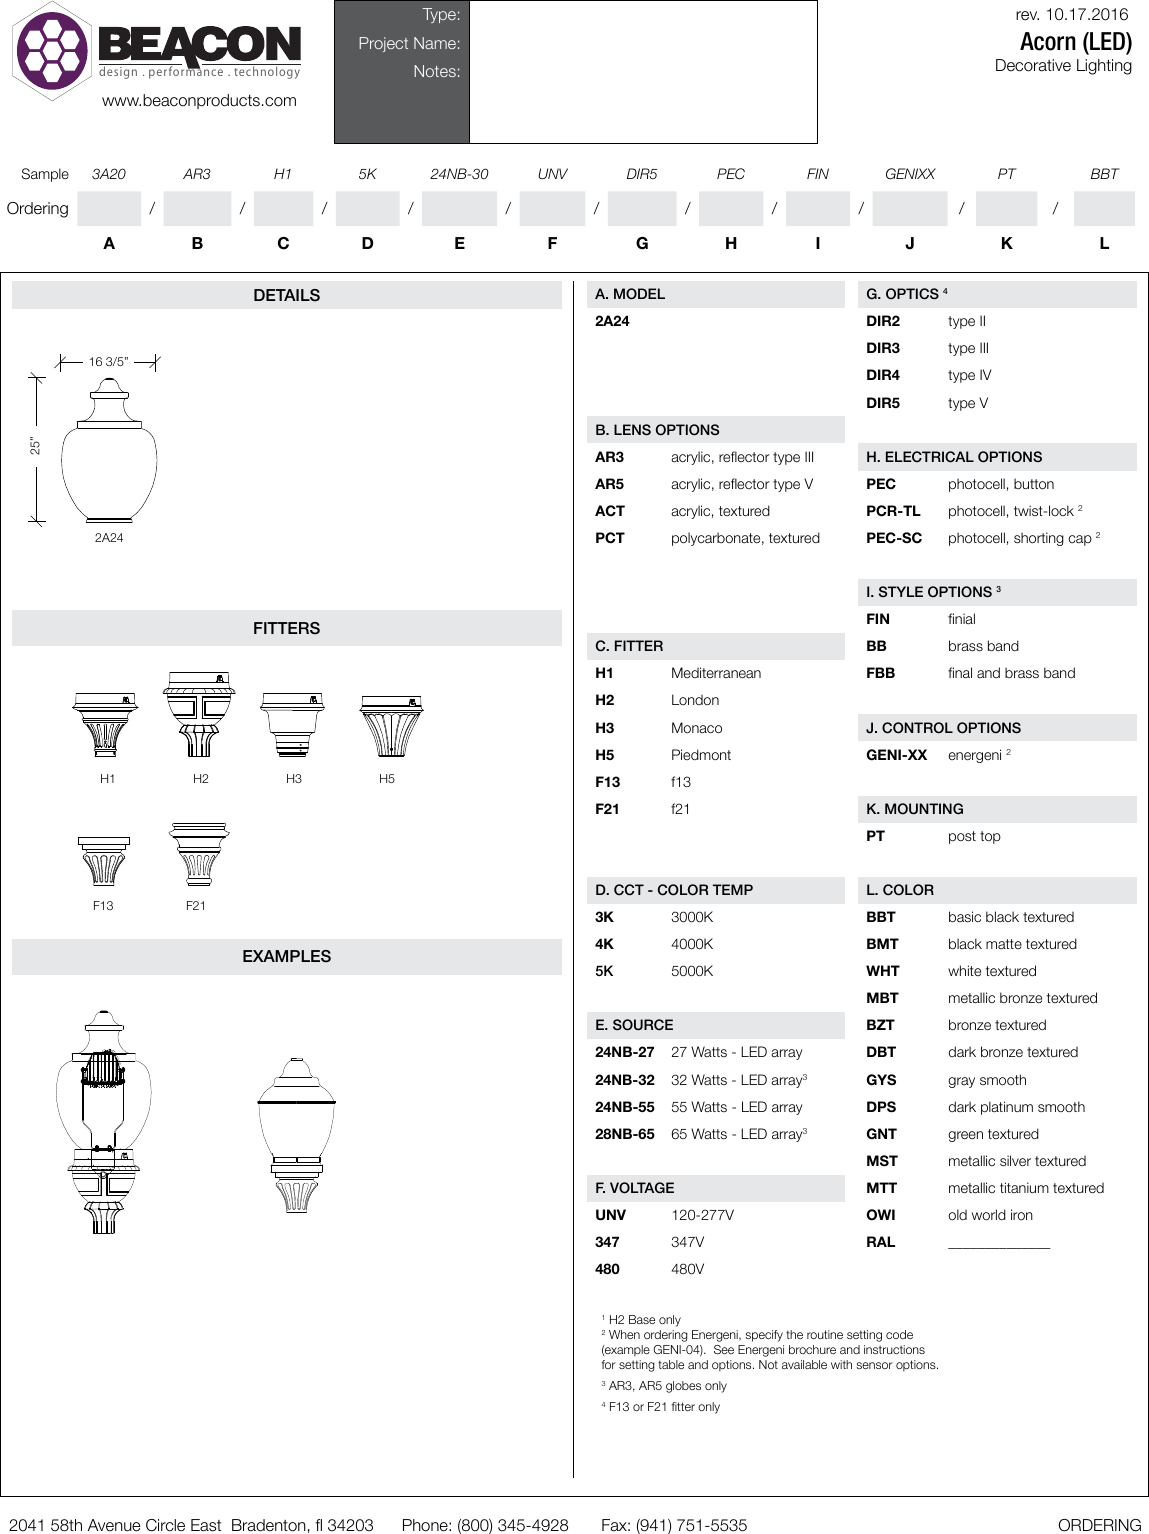 Page 1 of 2 - Acorns Spheres LED Spec Sheet